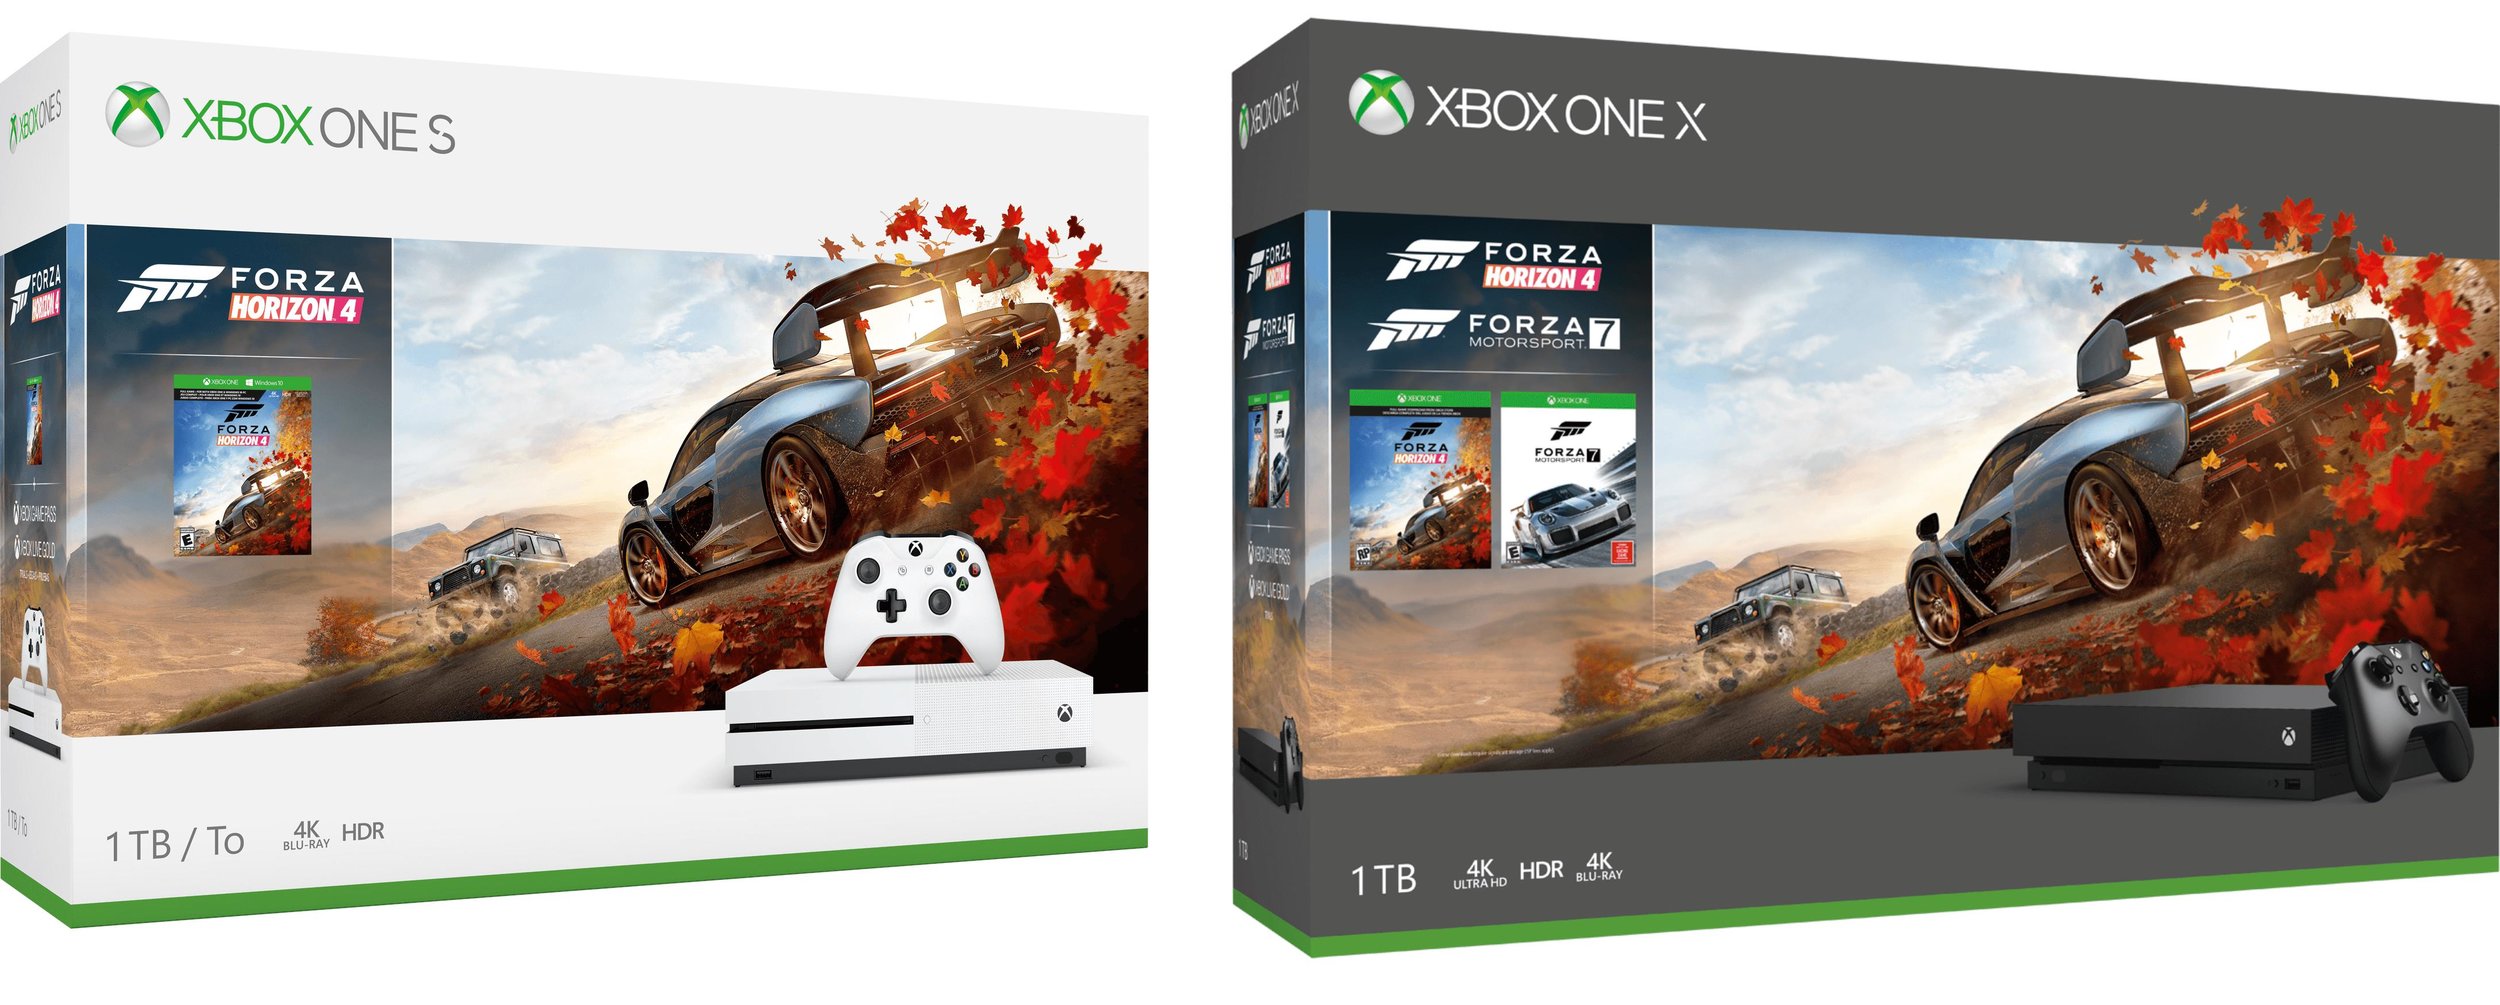 Forza Horizon 4 New Screenshots and Console Bundles Revealed — The Nobeds